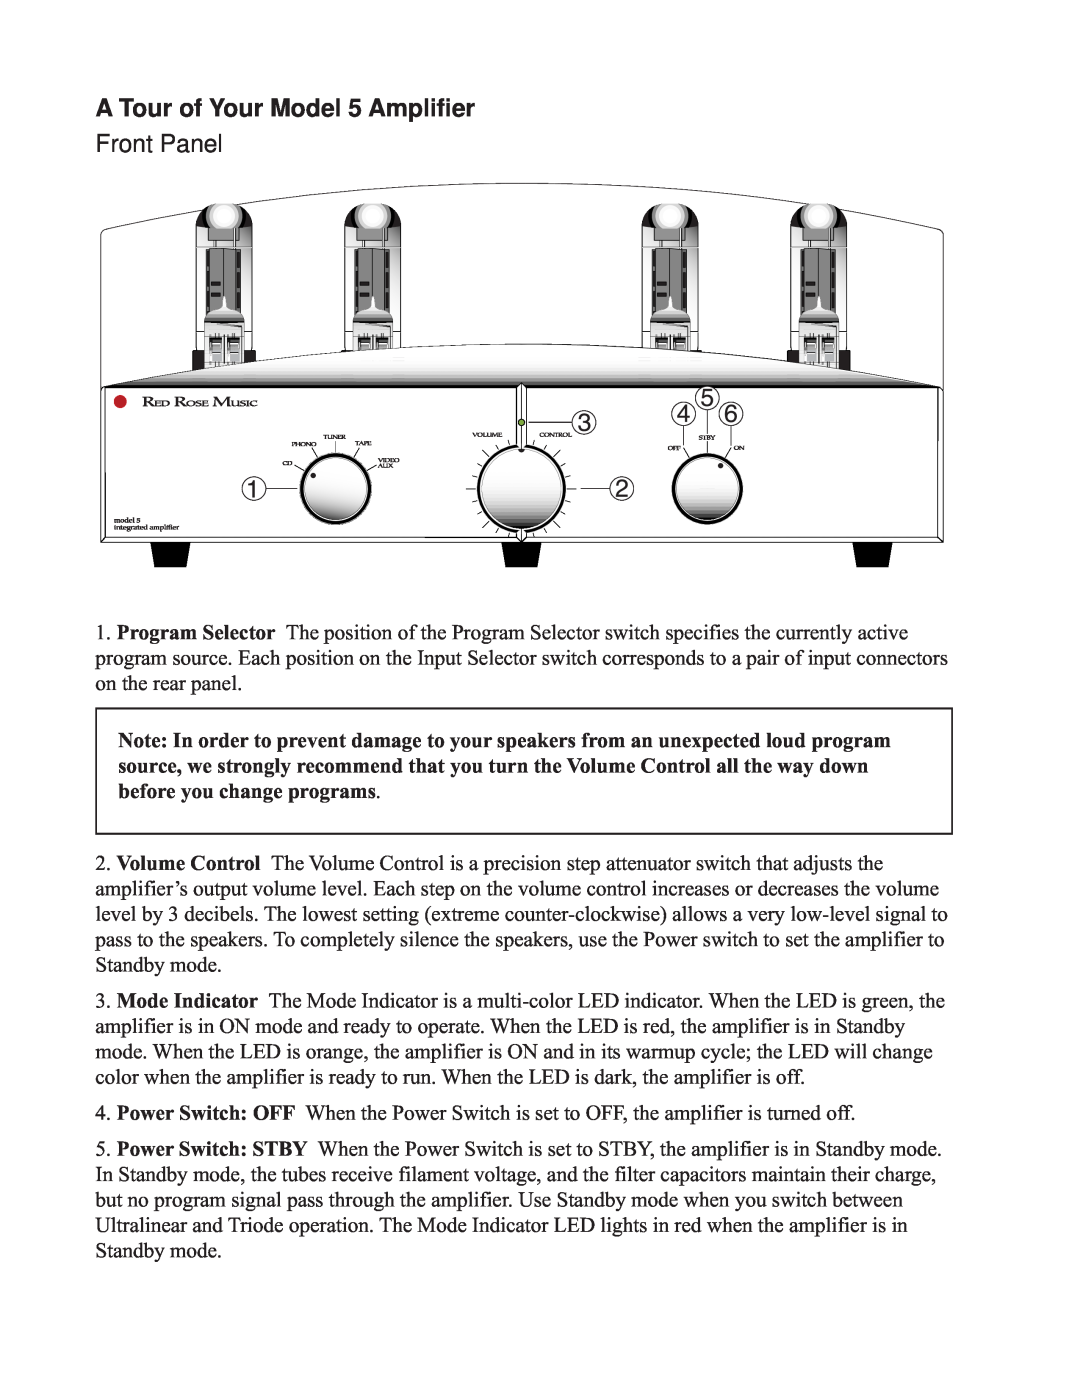 Red Rose Music owner manual A Tour of Your Model 5 Amplifier, Front Panel 